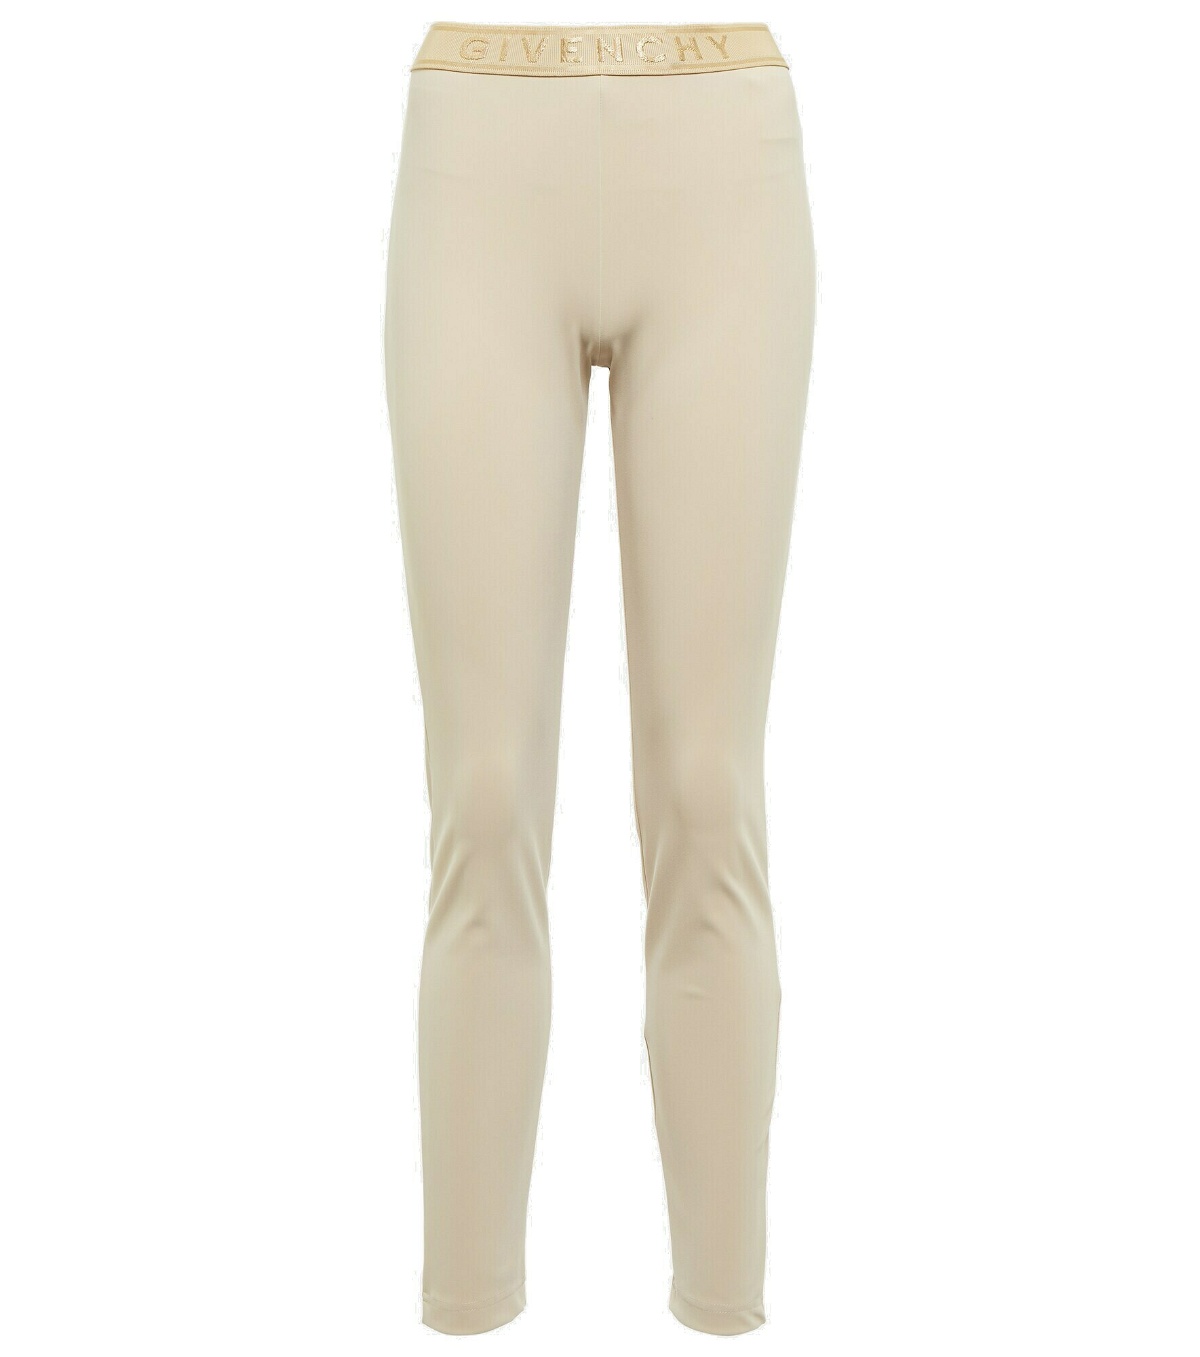 Taupe Embroidered Leggings by Givenchy on Sale